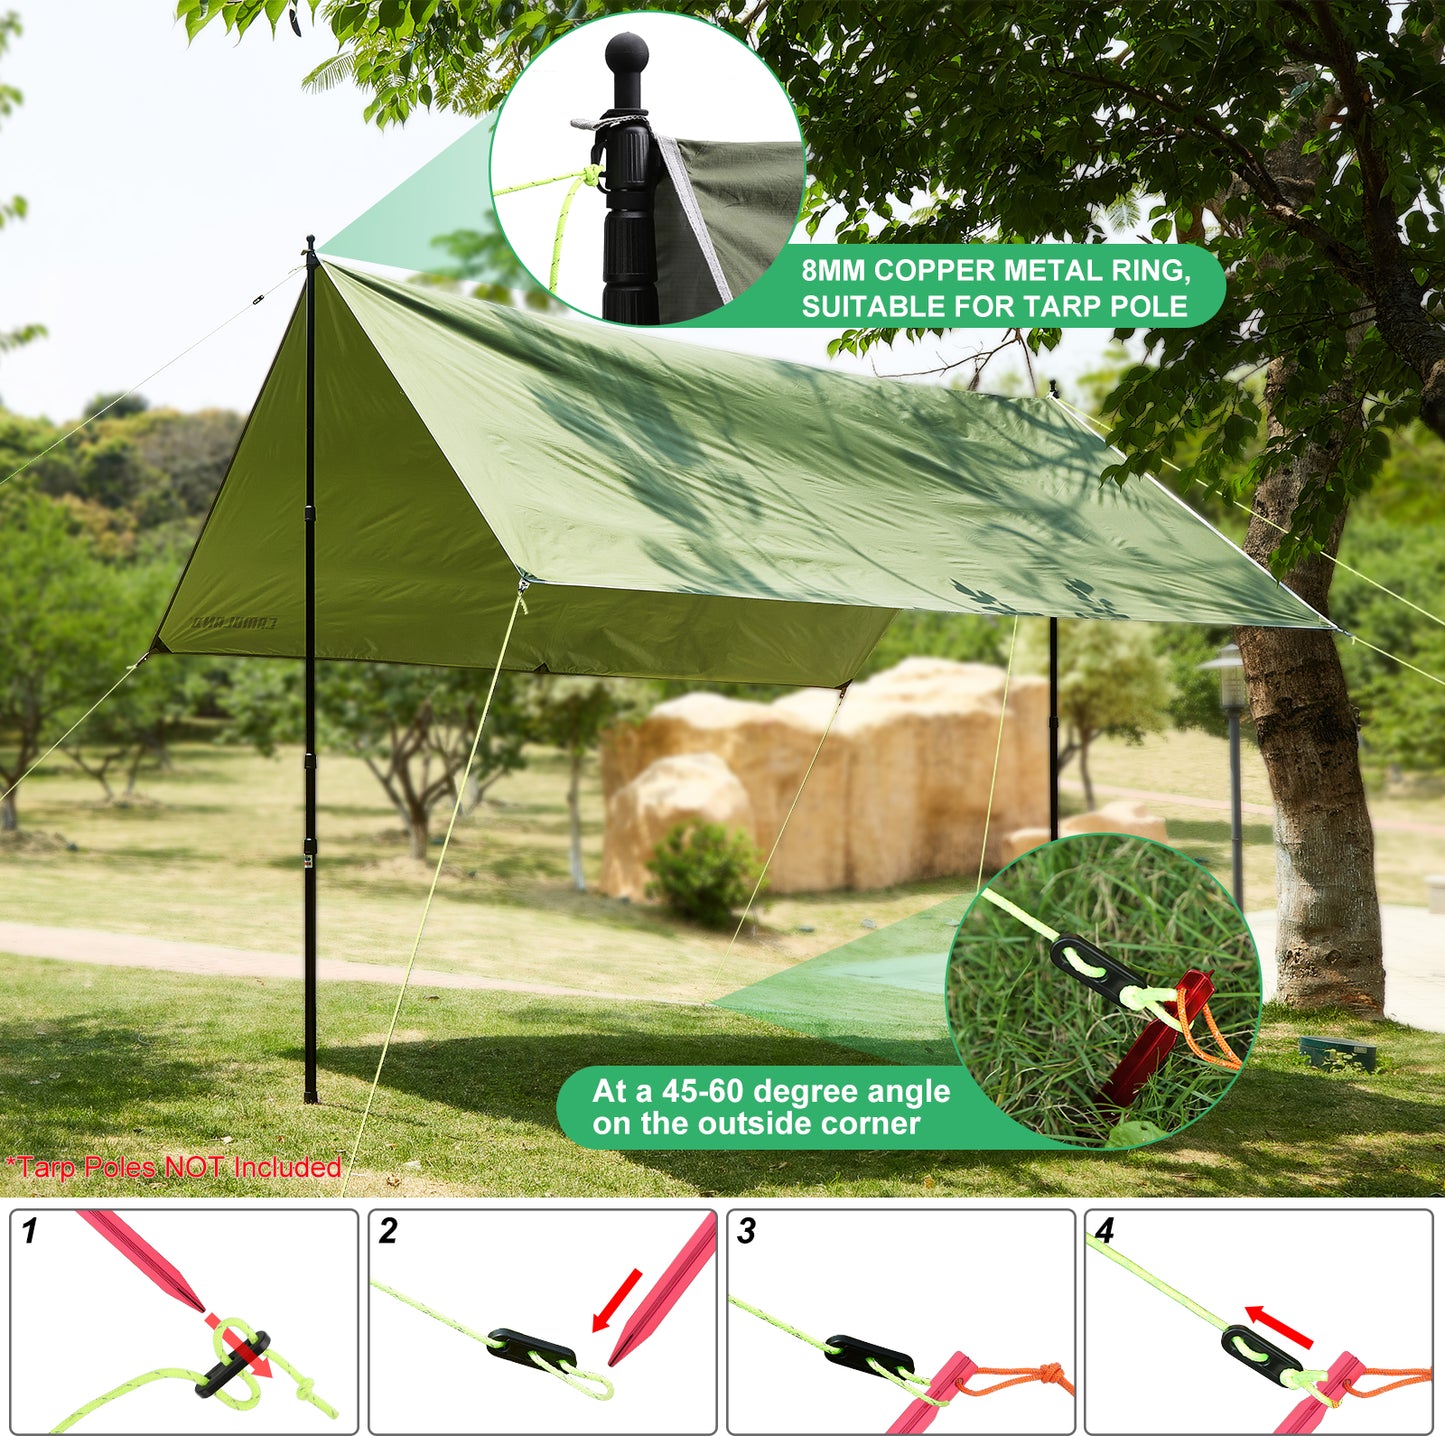 Camping Tarp, Waterproof, Lightweight and Portable, Perfect for Outdoor Camping, Hiking and Backpacking